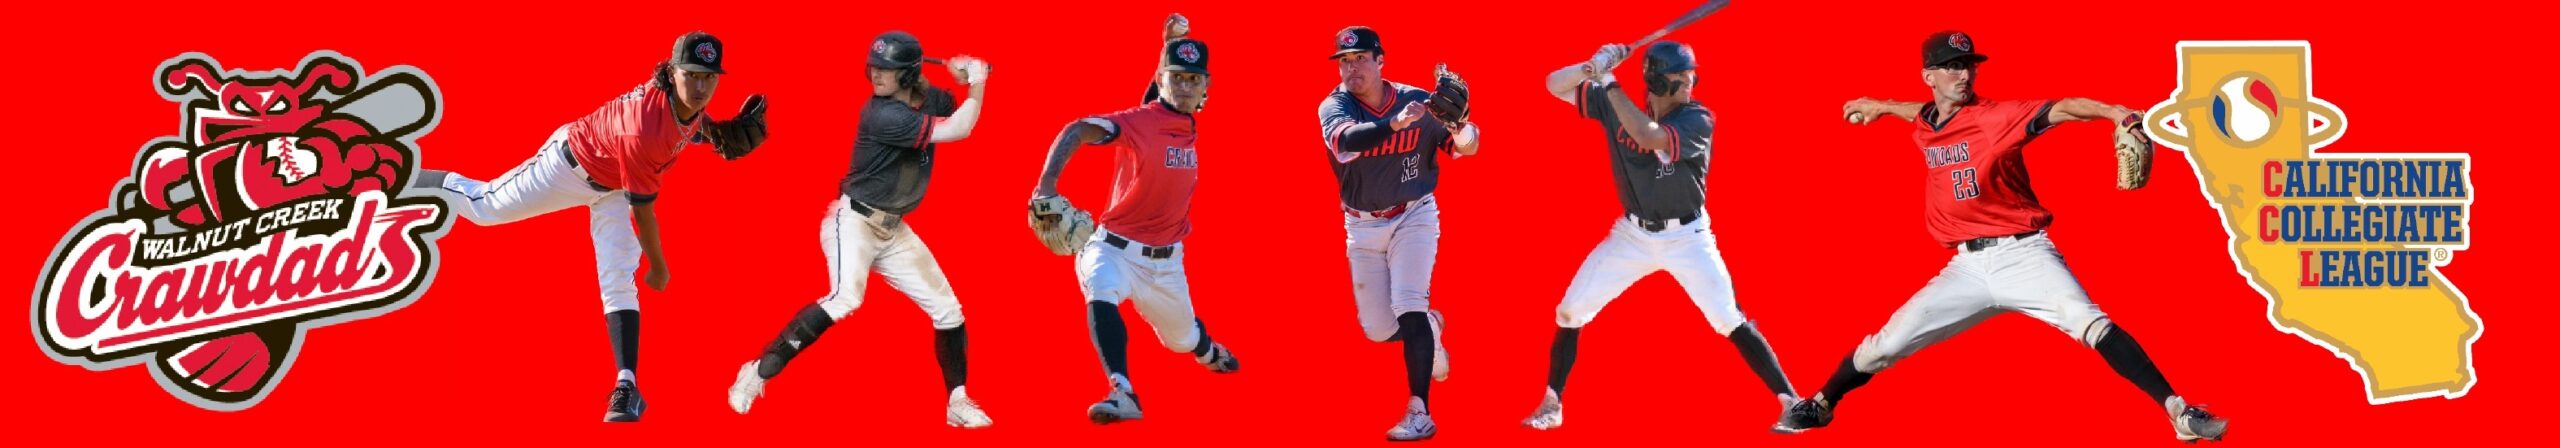 Crawdads website header image_red_6 players - wide_3_cropped